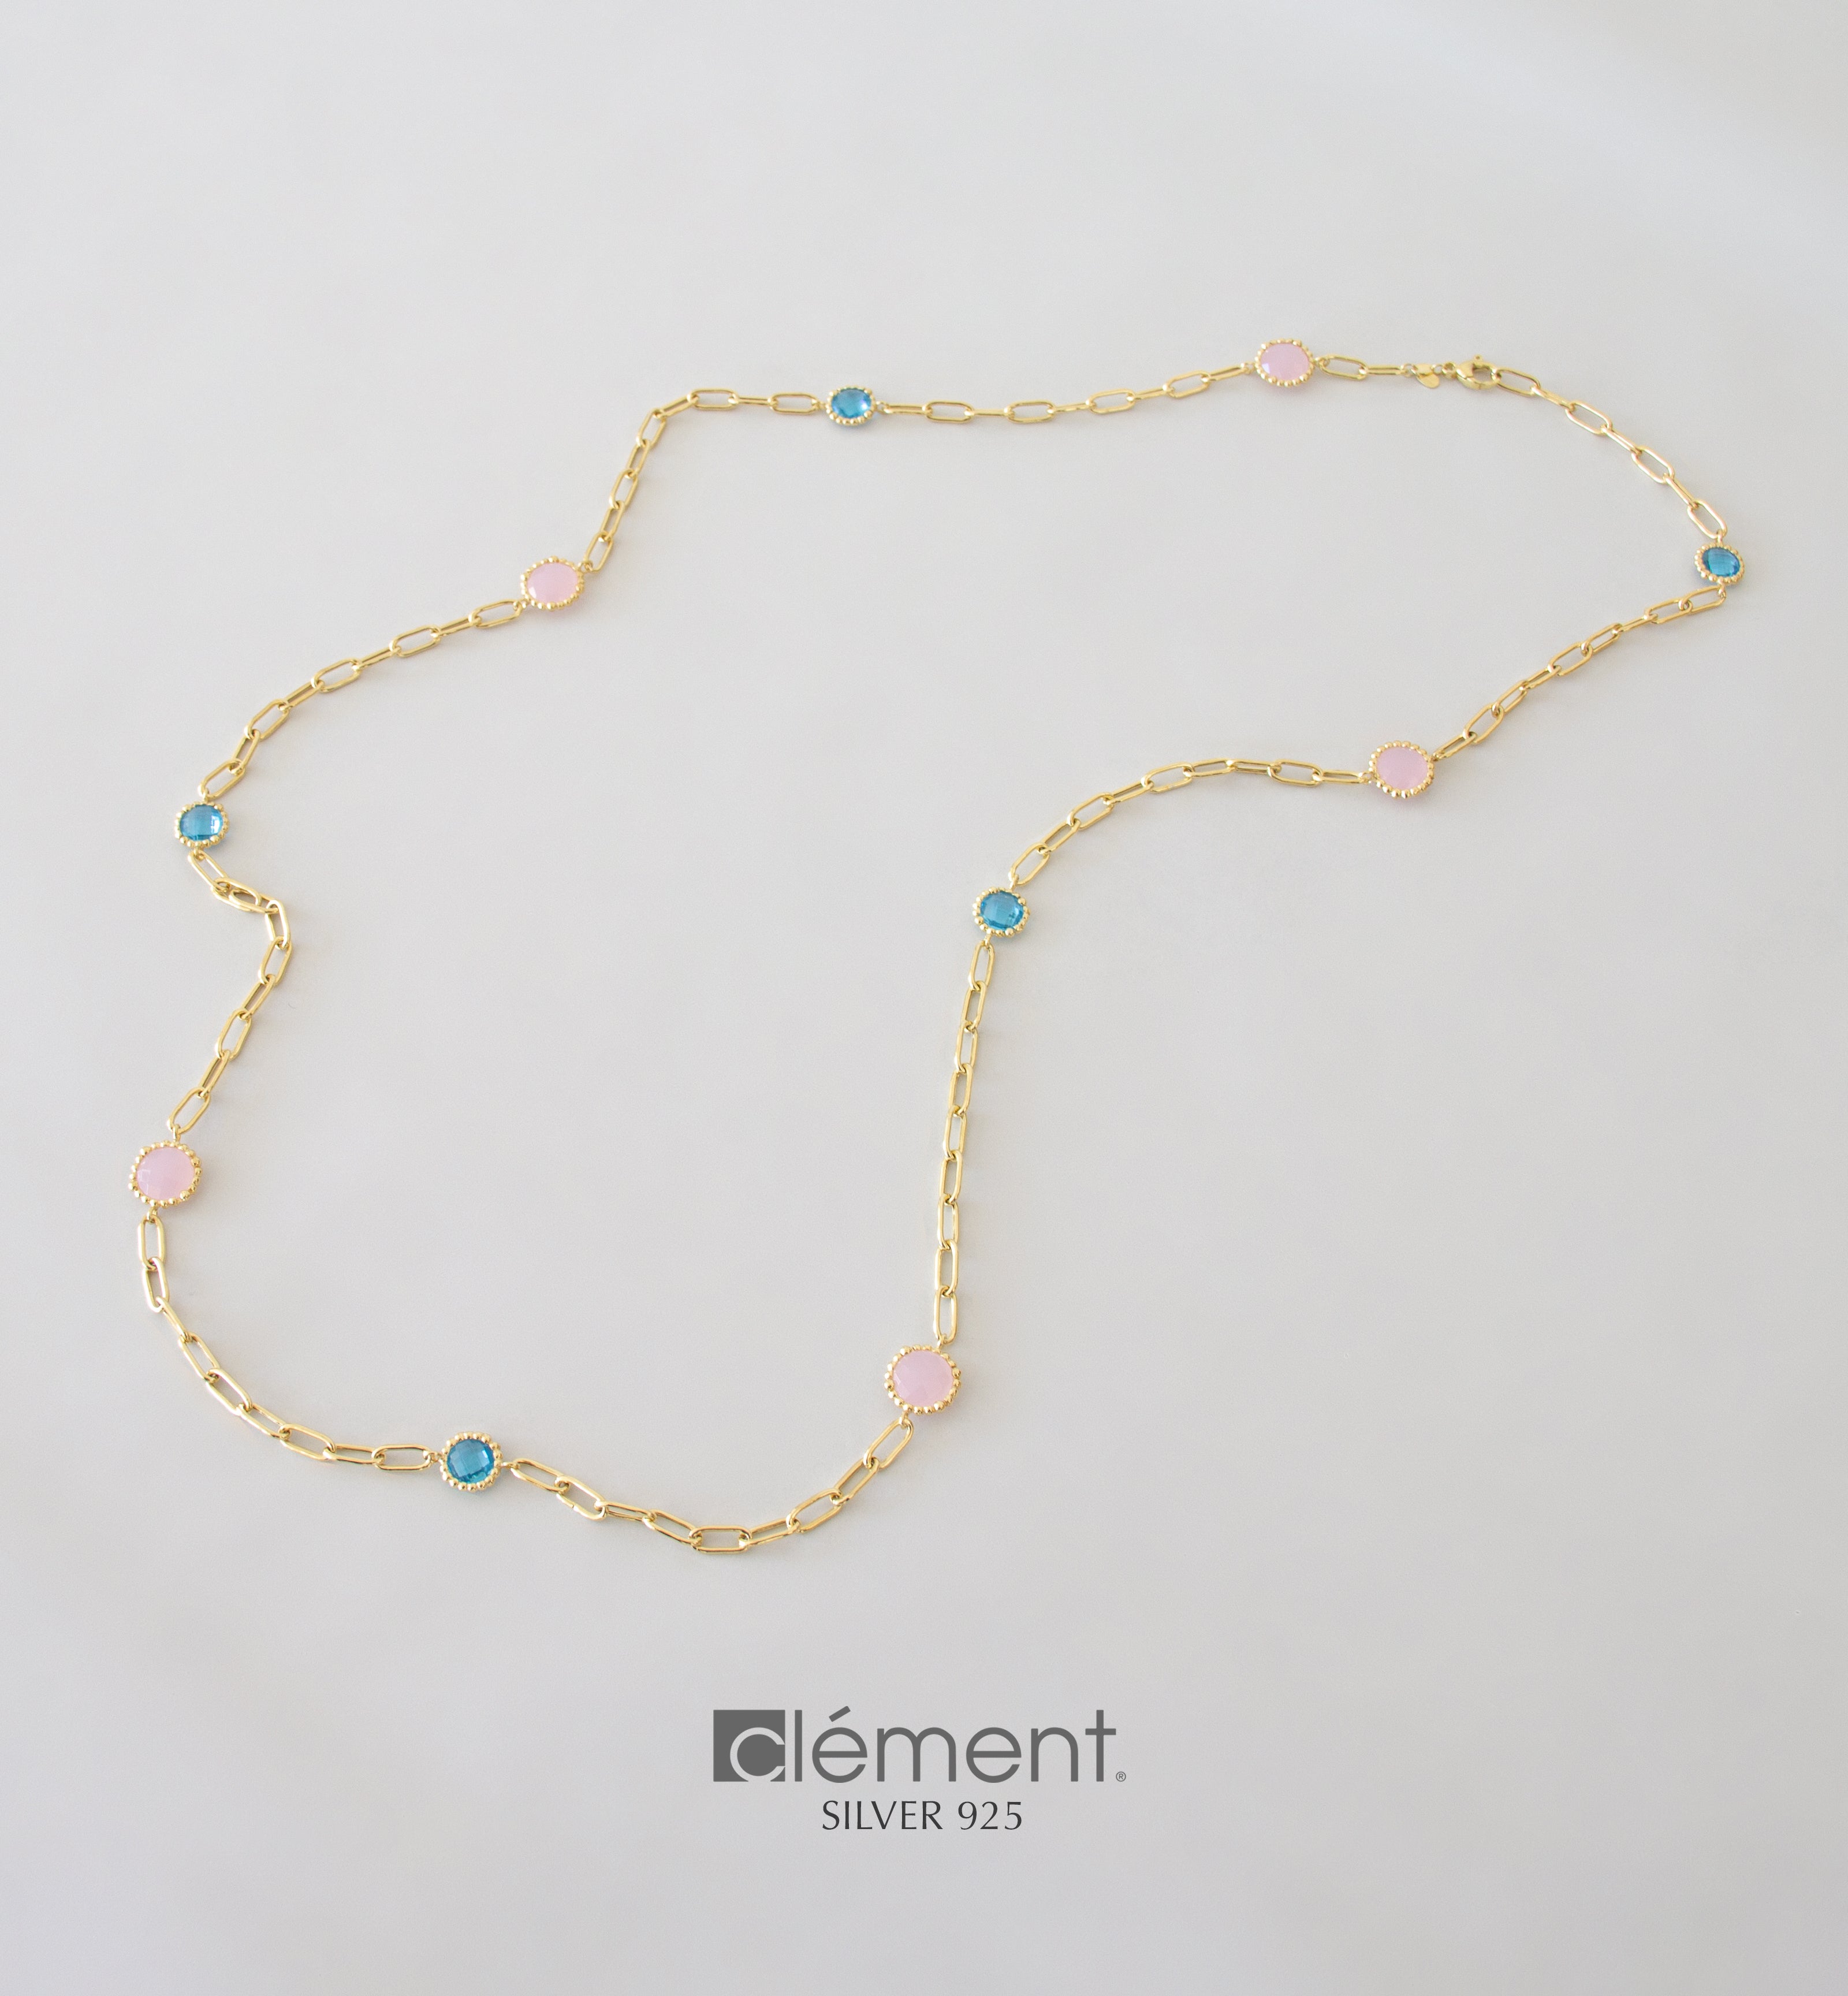 Silver 925 Long Necklace with Coloured Stones